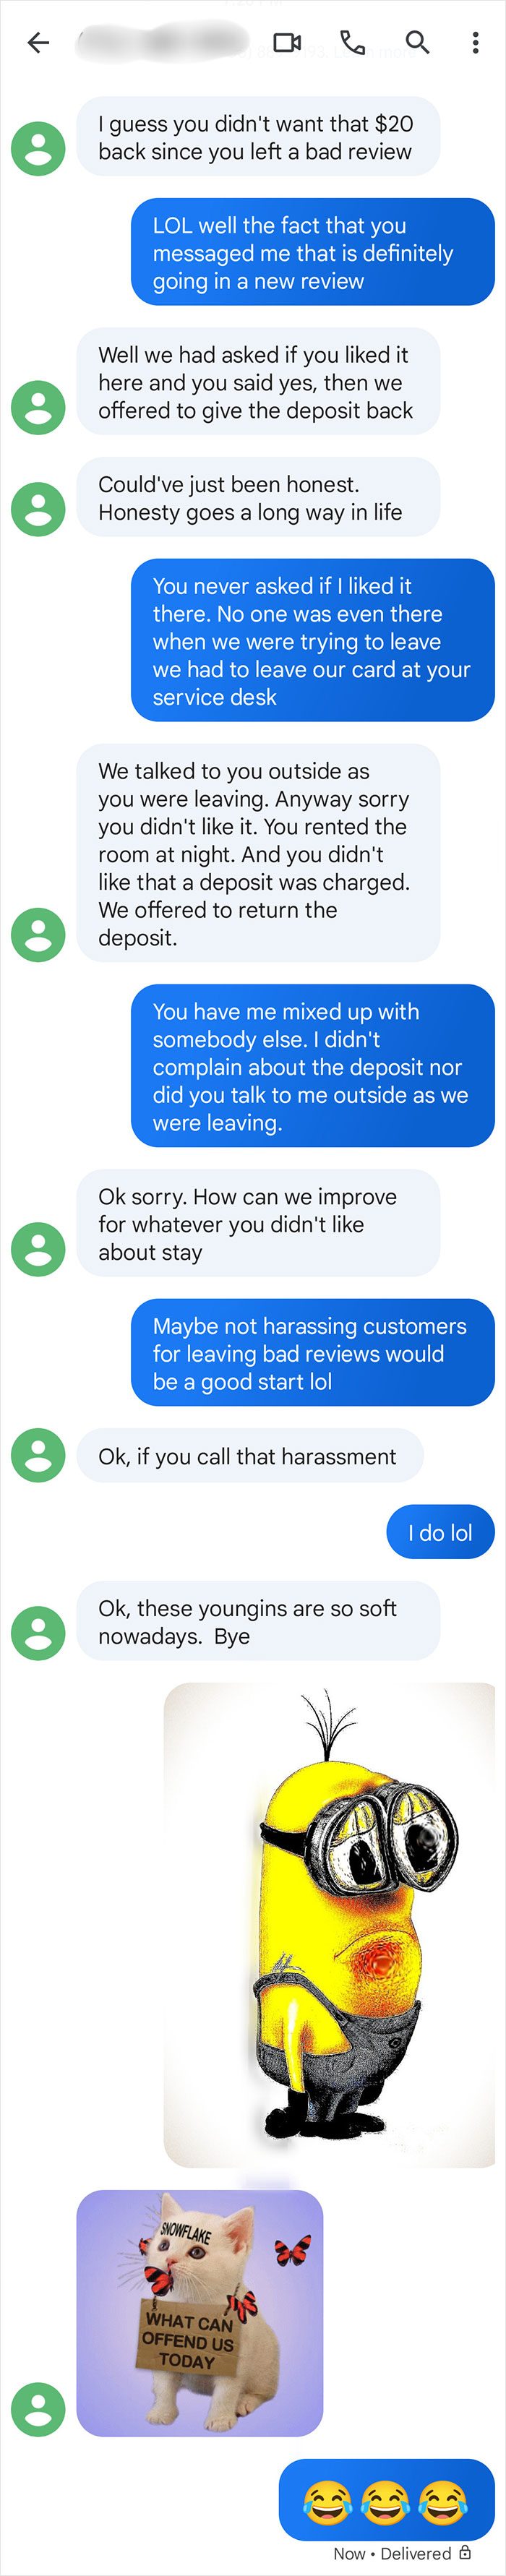 Hotel Keeps My Deposit Because I Left A Poor Review On Booking.com